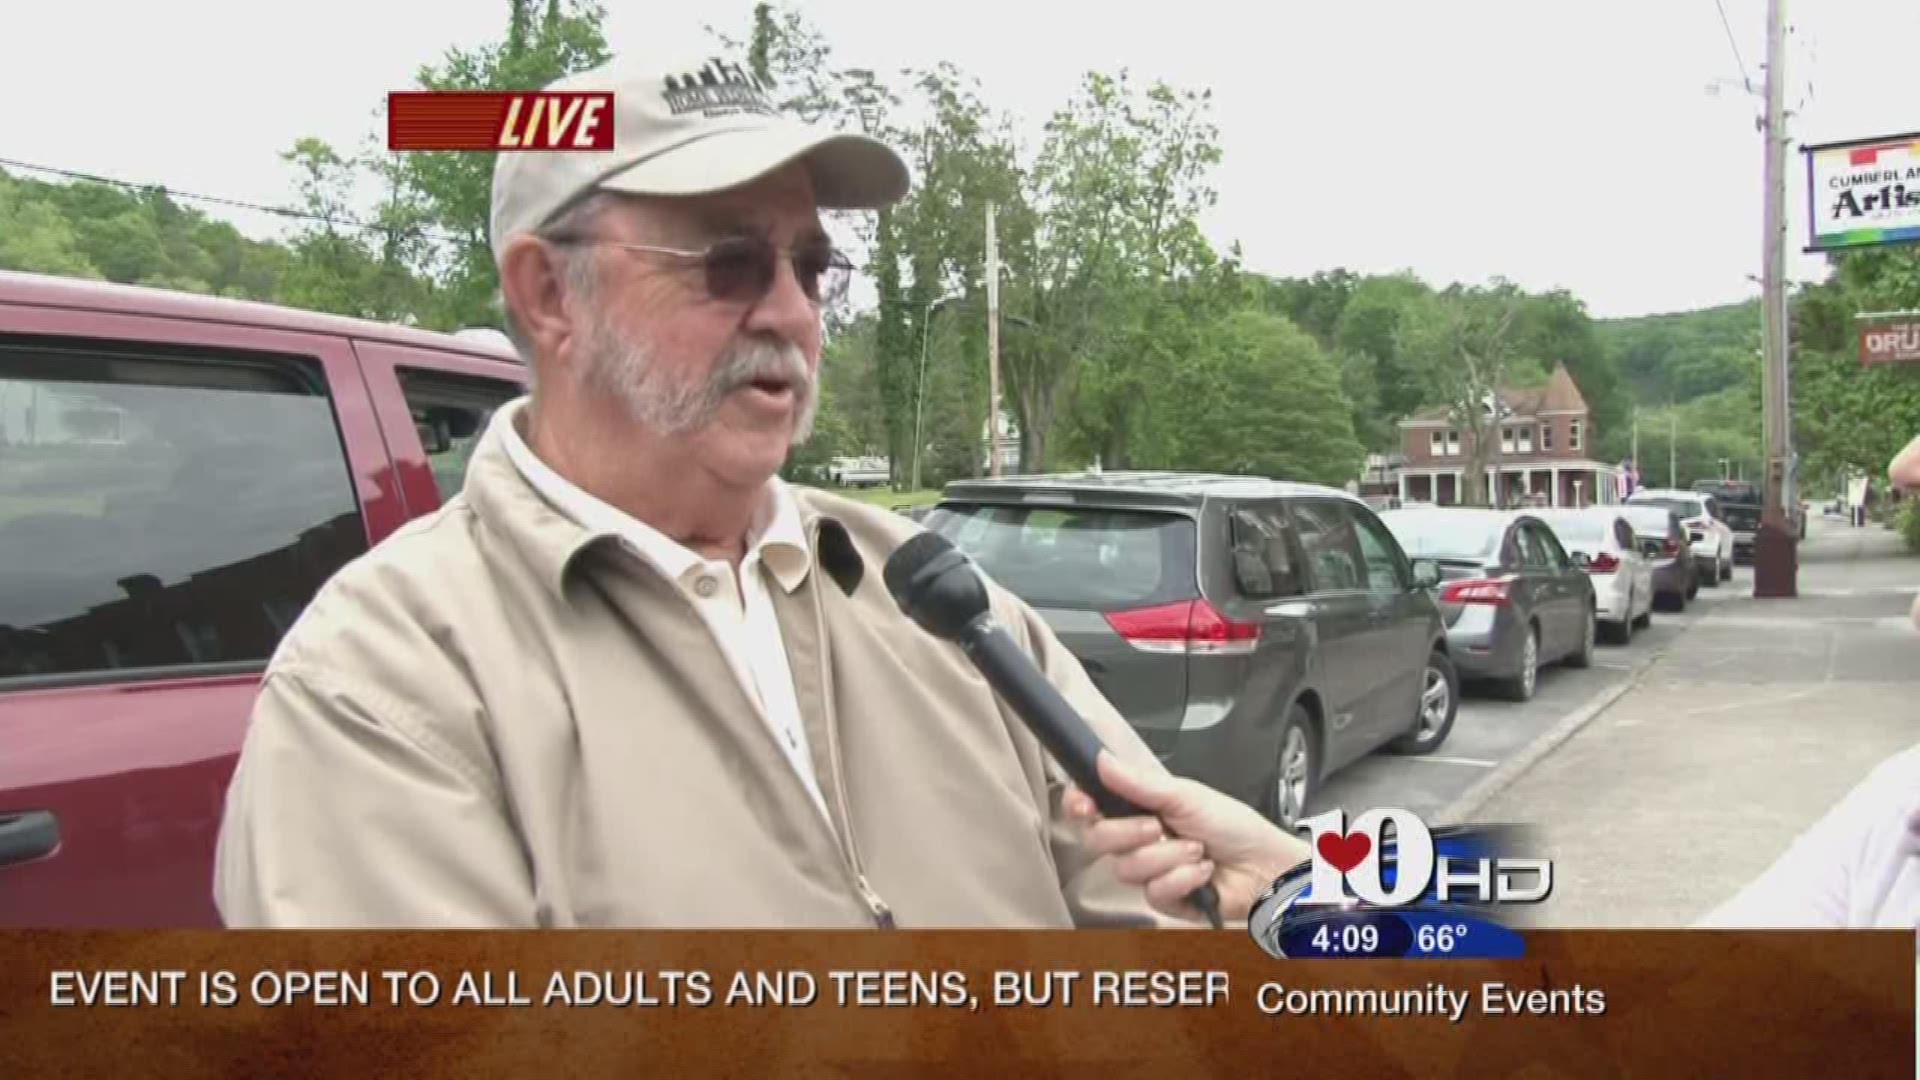 Cumberland Gap Mayor Bill McGaffee discusses the town and what make it so special!